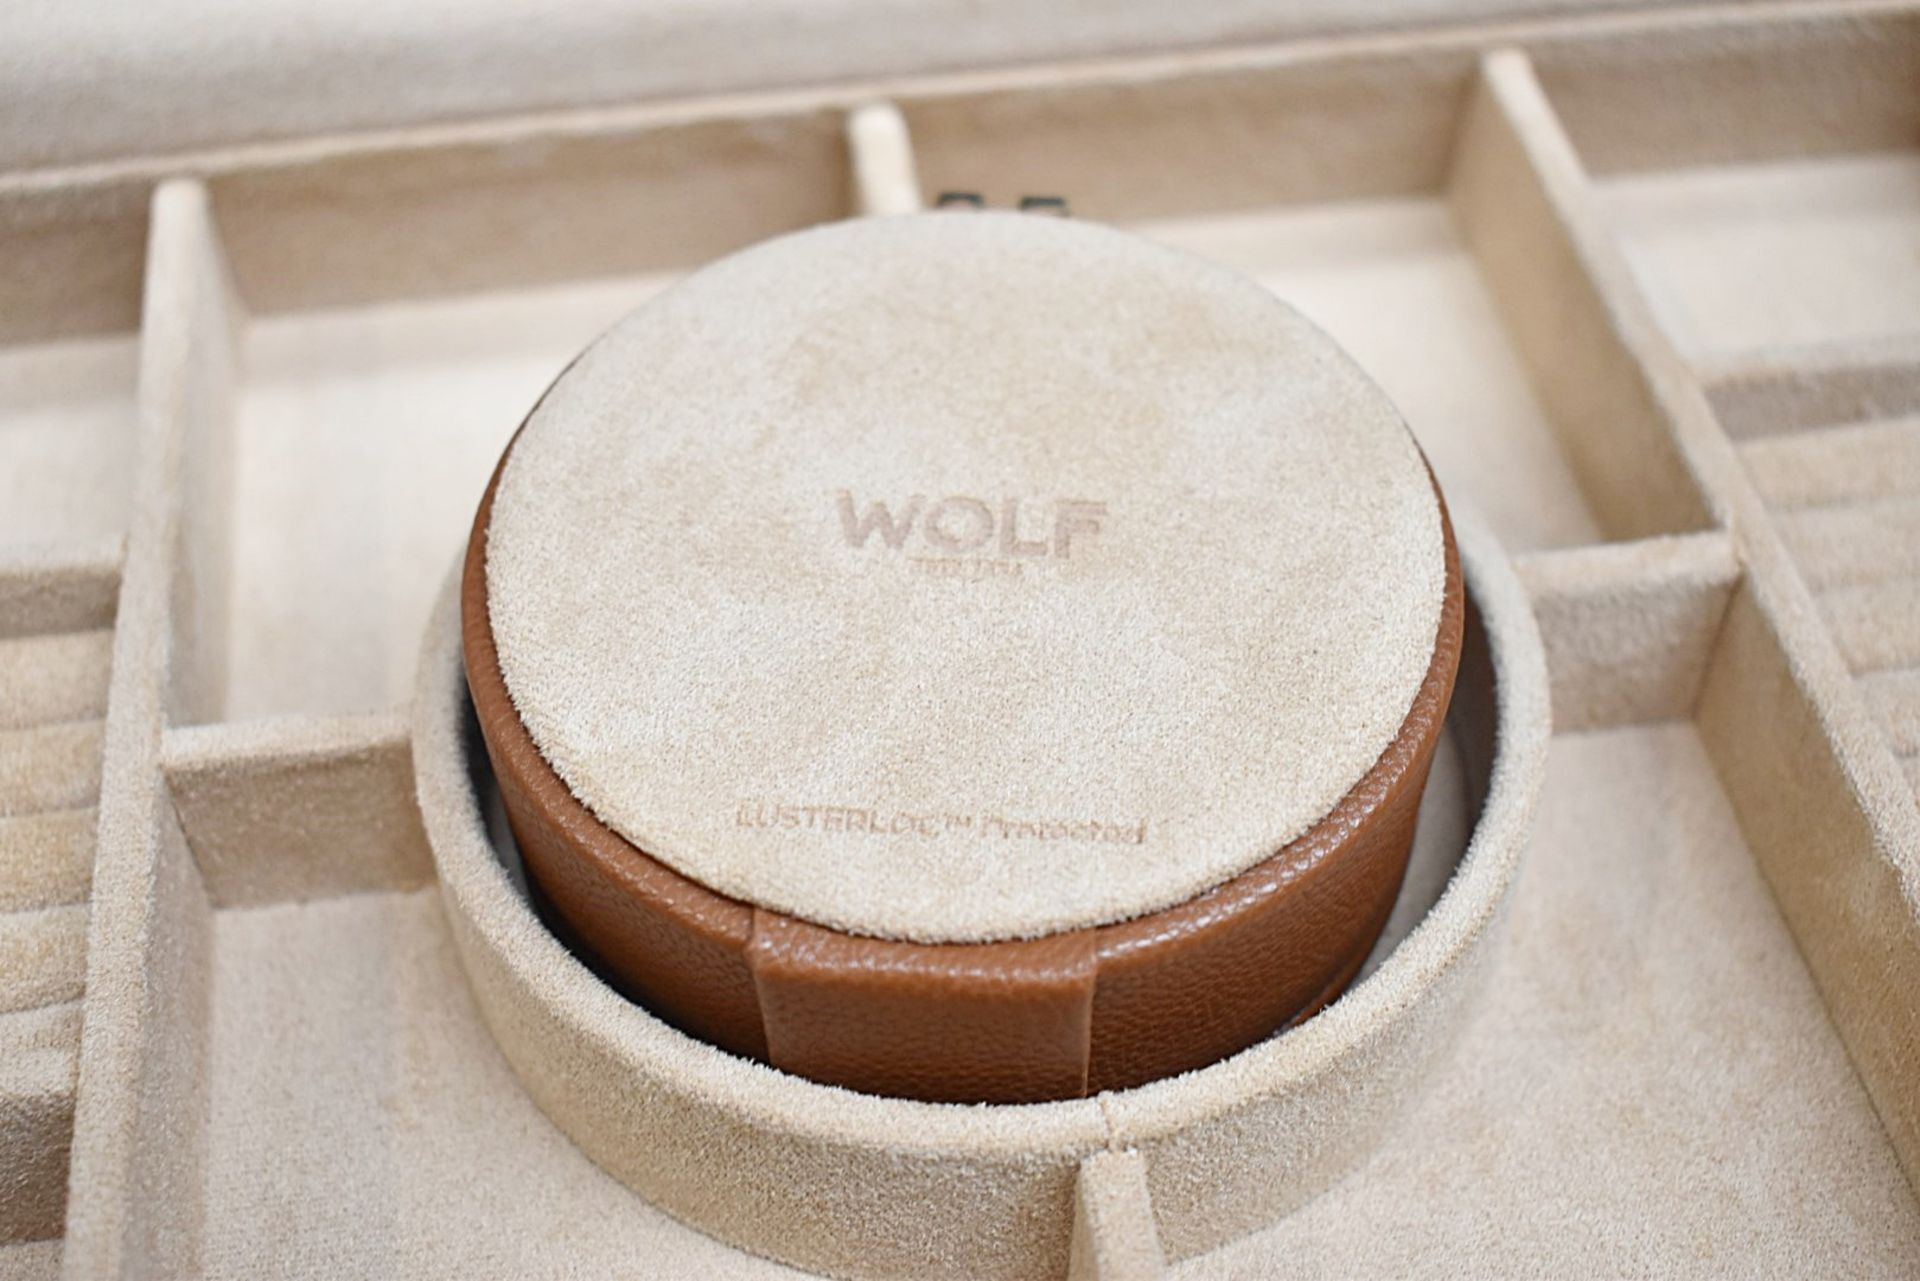 1 x WOLF 'Cassandra' Luxury Leather Upholstered Jewellery Case With Suede Lining - RRP £605.00 - Image 5 of 9